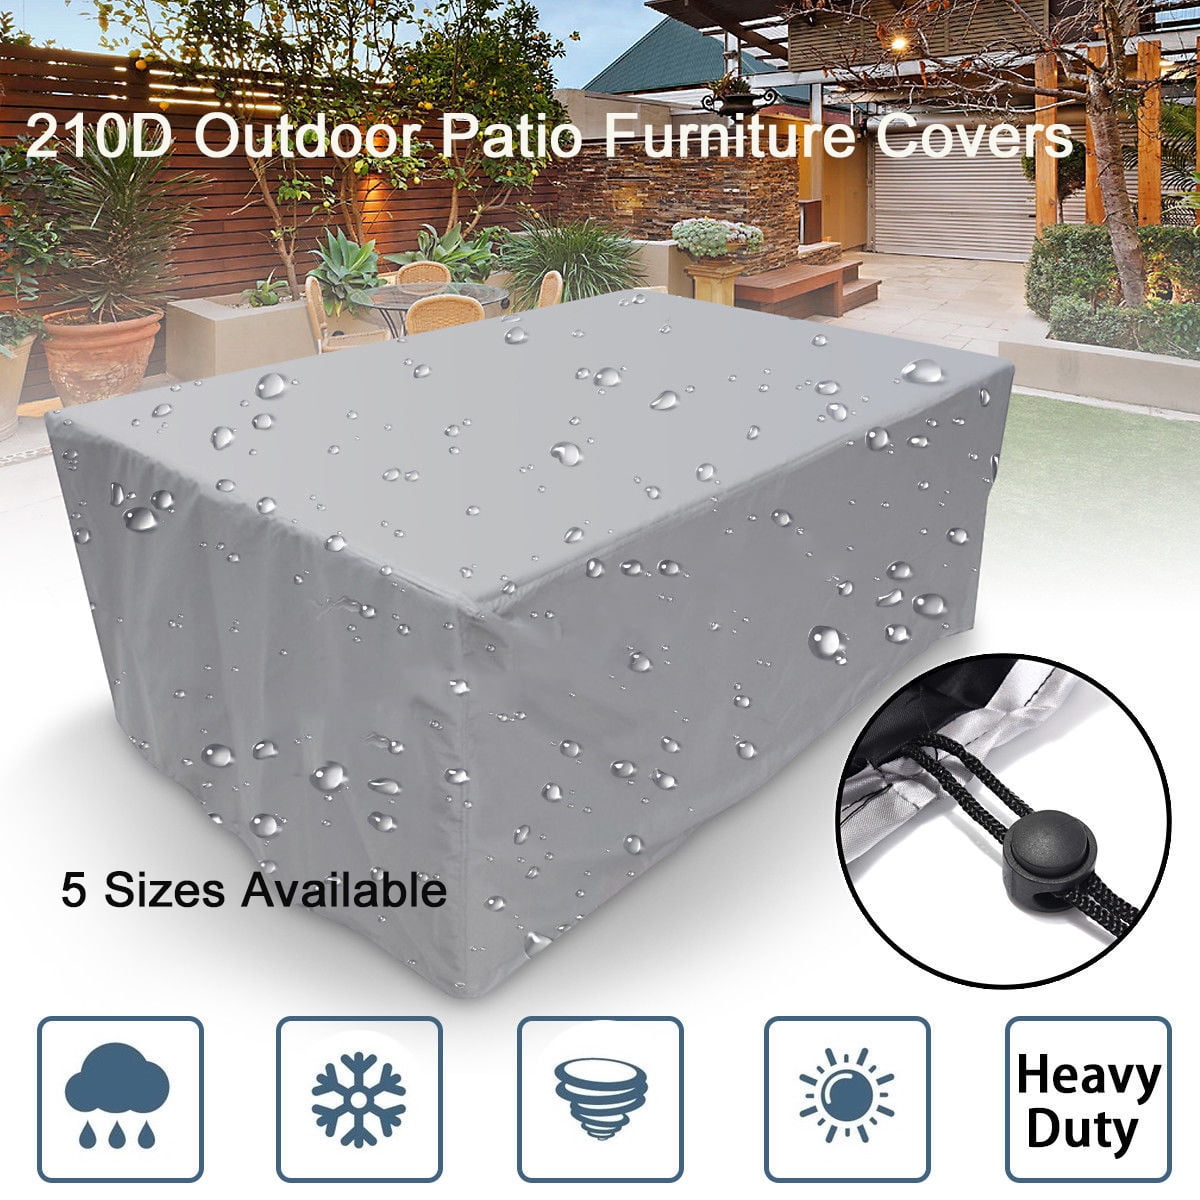 Details about   Waterproof Outdoor Garden Patio Furniture Cover Rectangular Table Protector US 